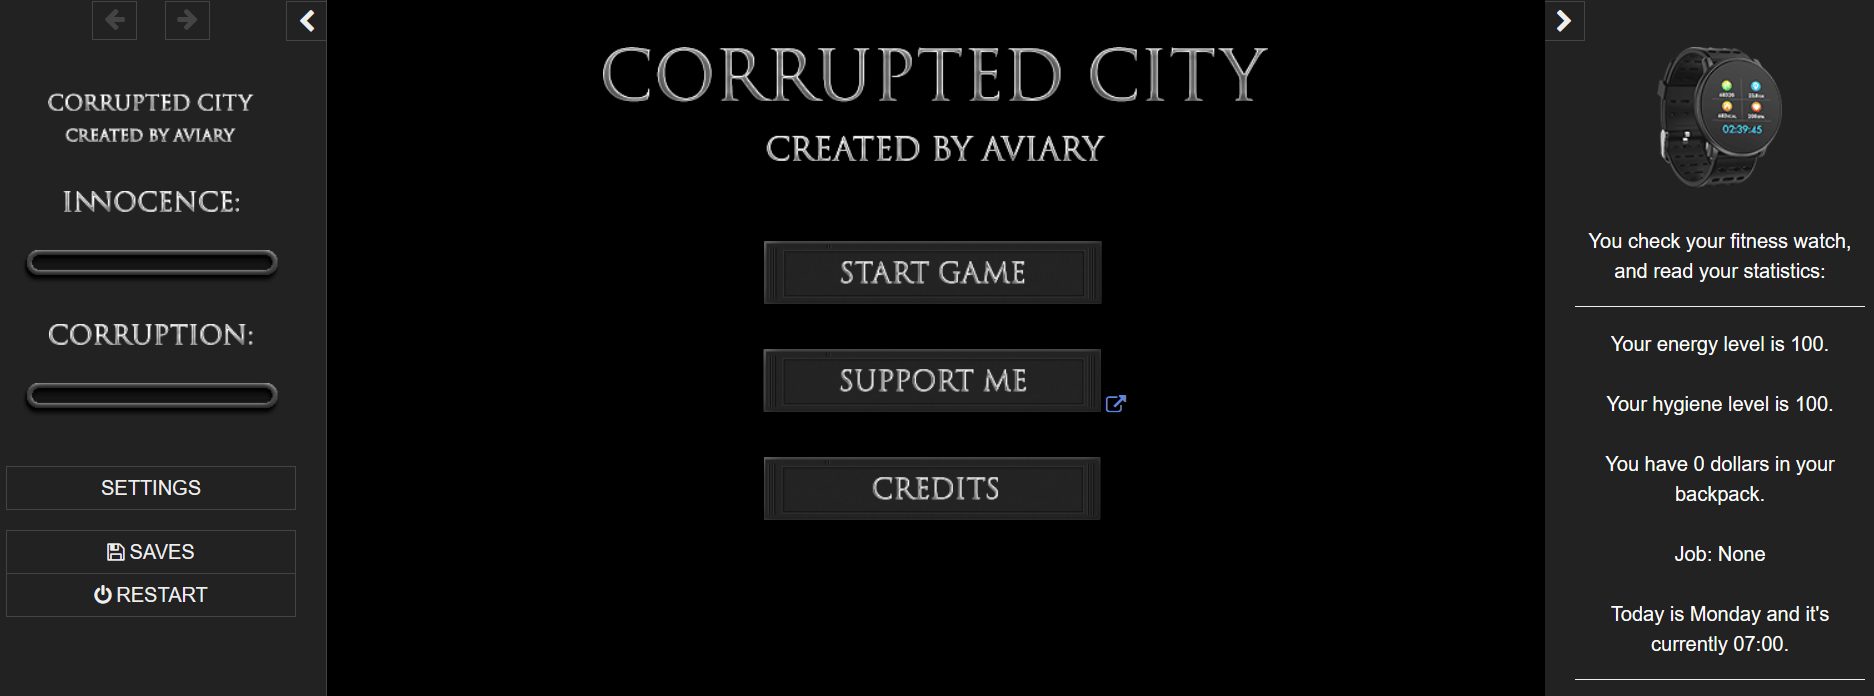 corrupted city f95 forum